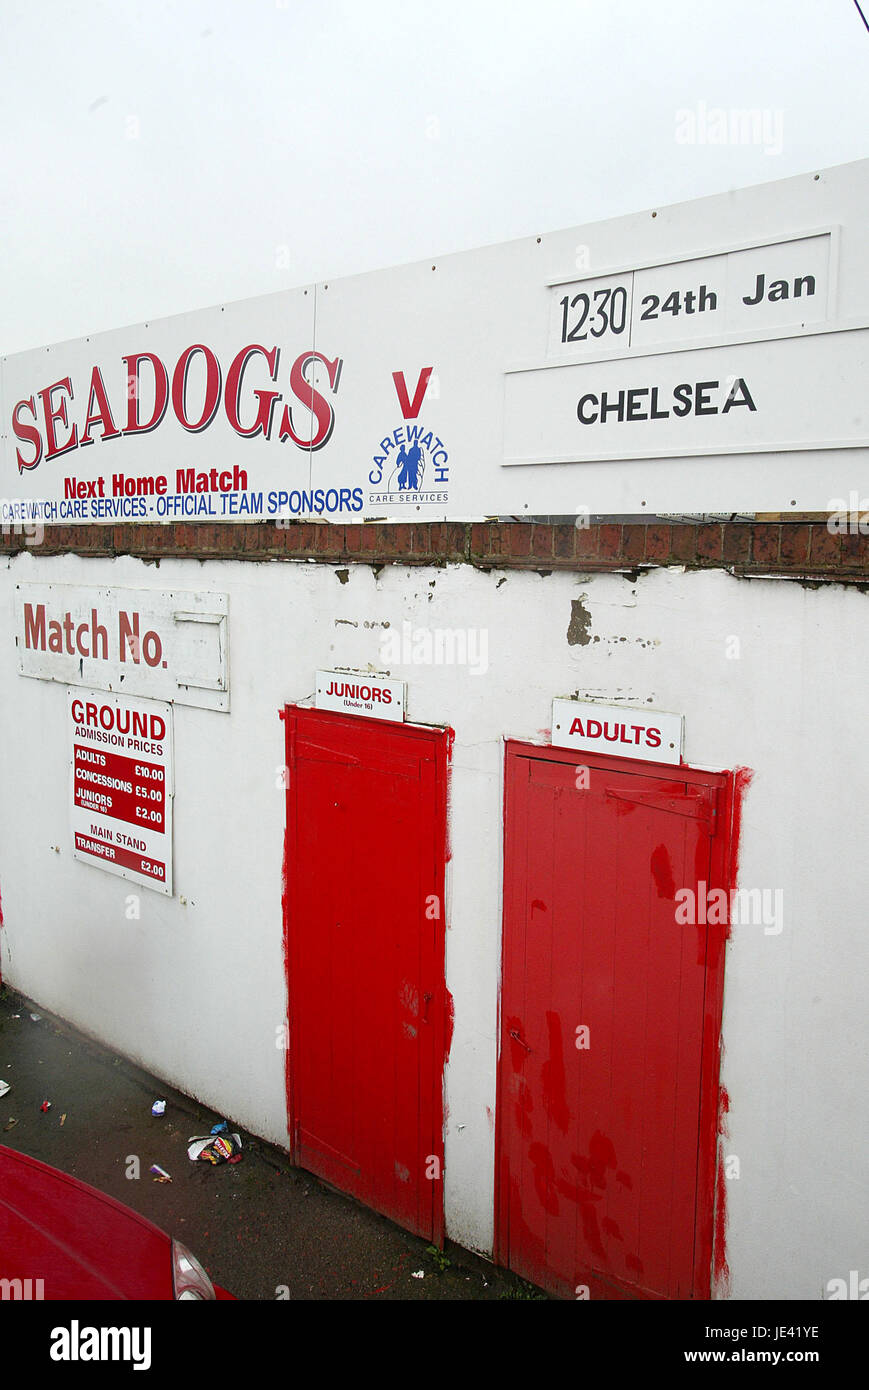 SEADOGS V CHELSEA SIGNER MCCAIN MCCAIN STADE STADIUM NORD YORKSHIRE ANGLETERRE SCARBOROUGH 22 Janvier 2004 Banque D'Images